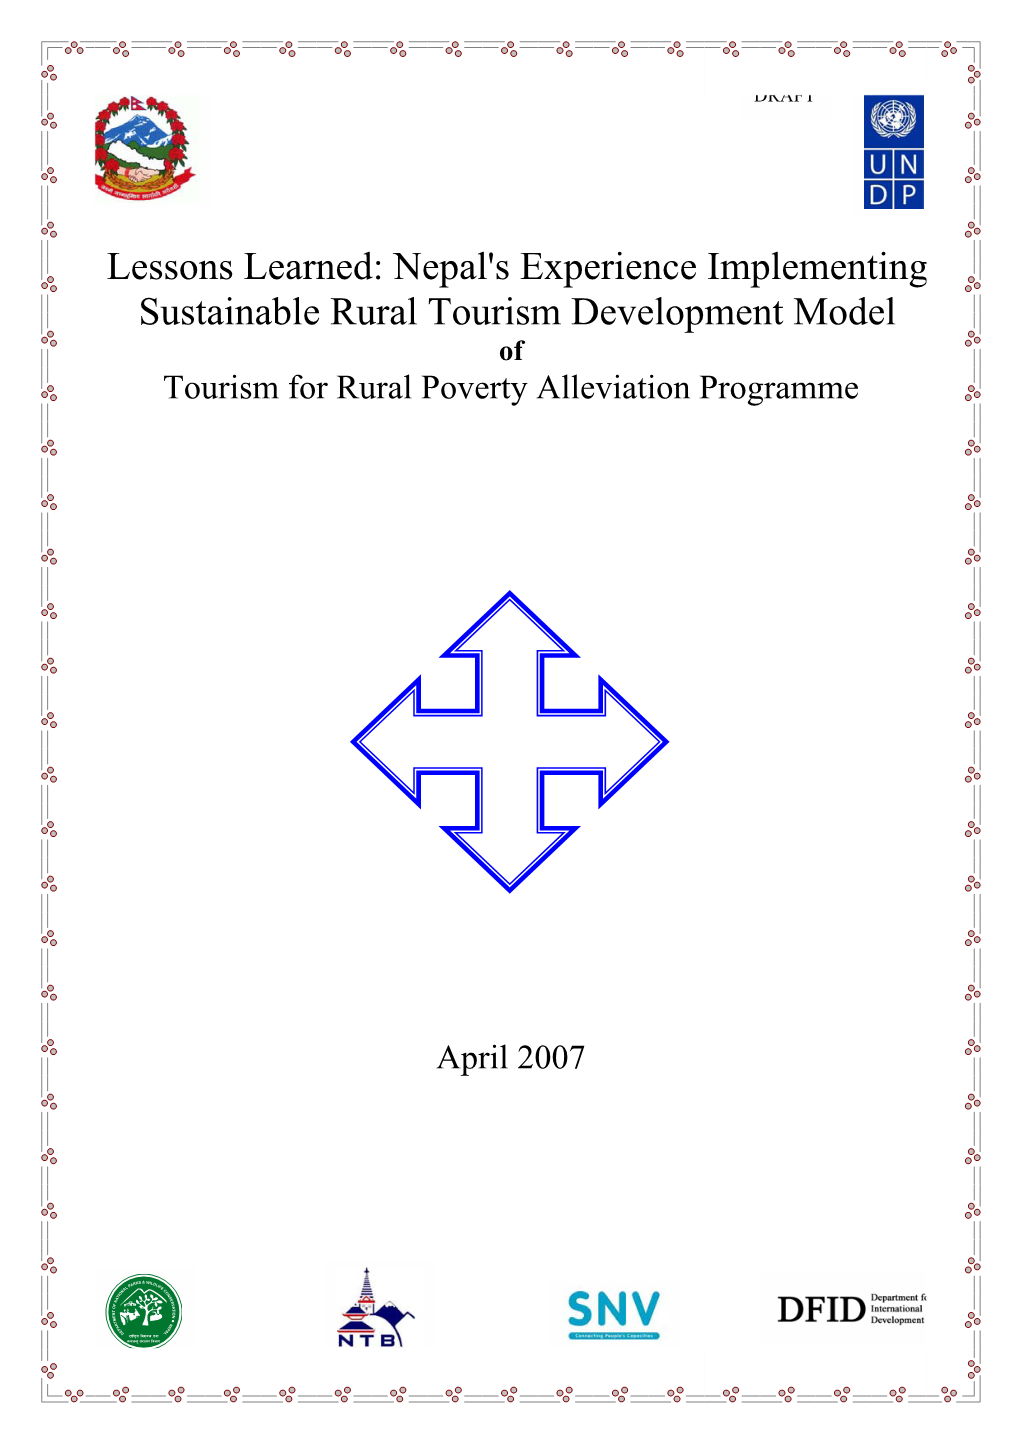 Nepal's Experience Implementing Sustainable Rural Tourism Development Model of Tourism for Rural Poverty Alleviation Programme